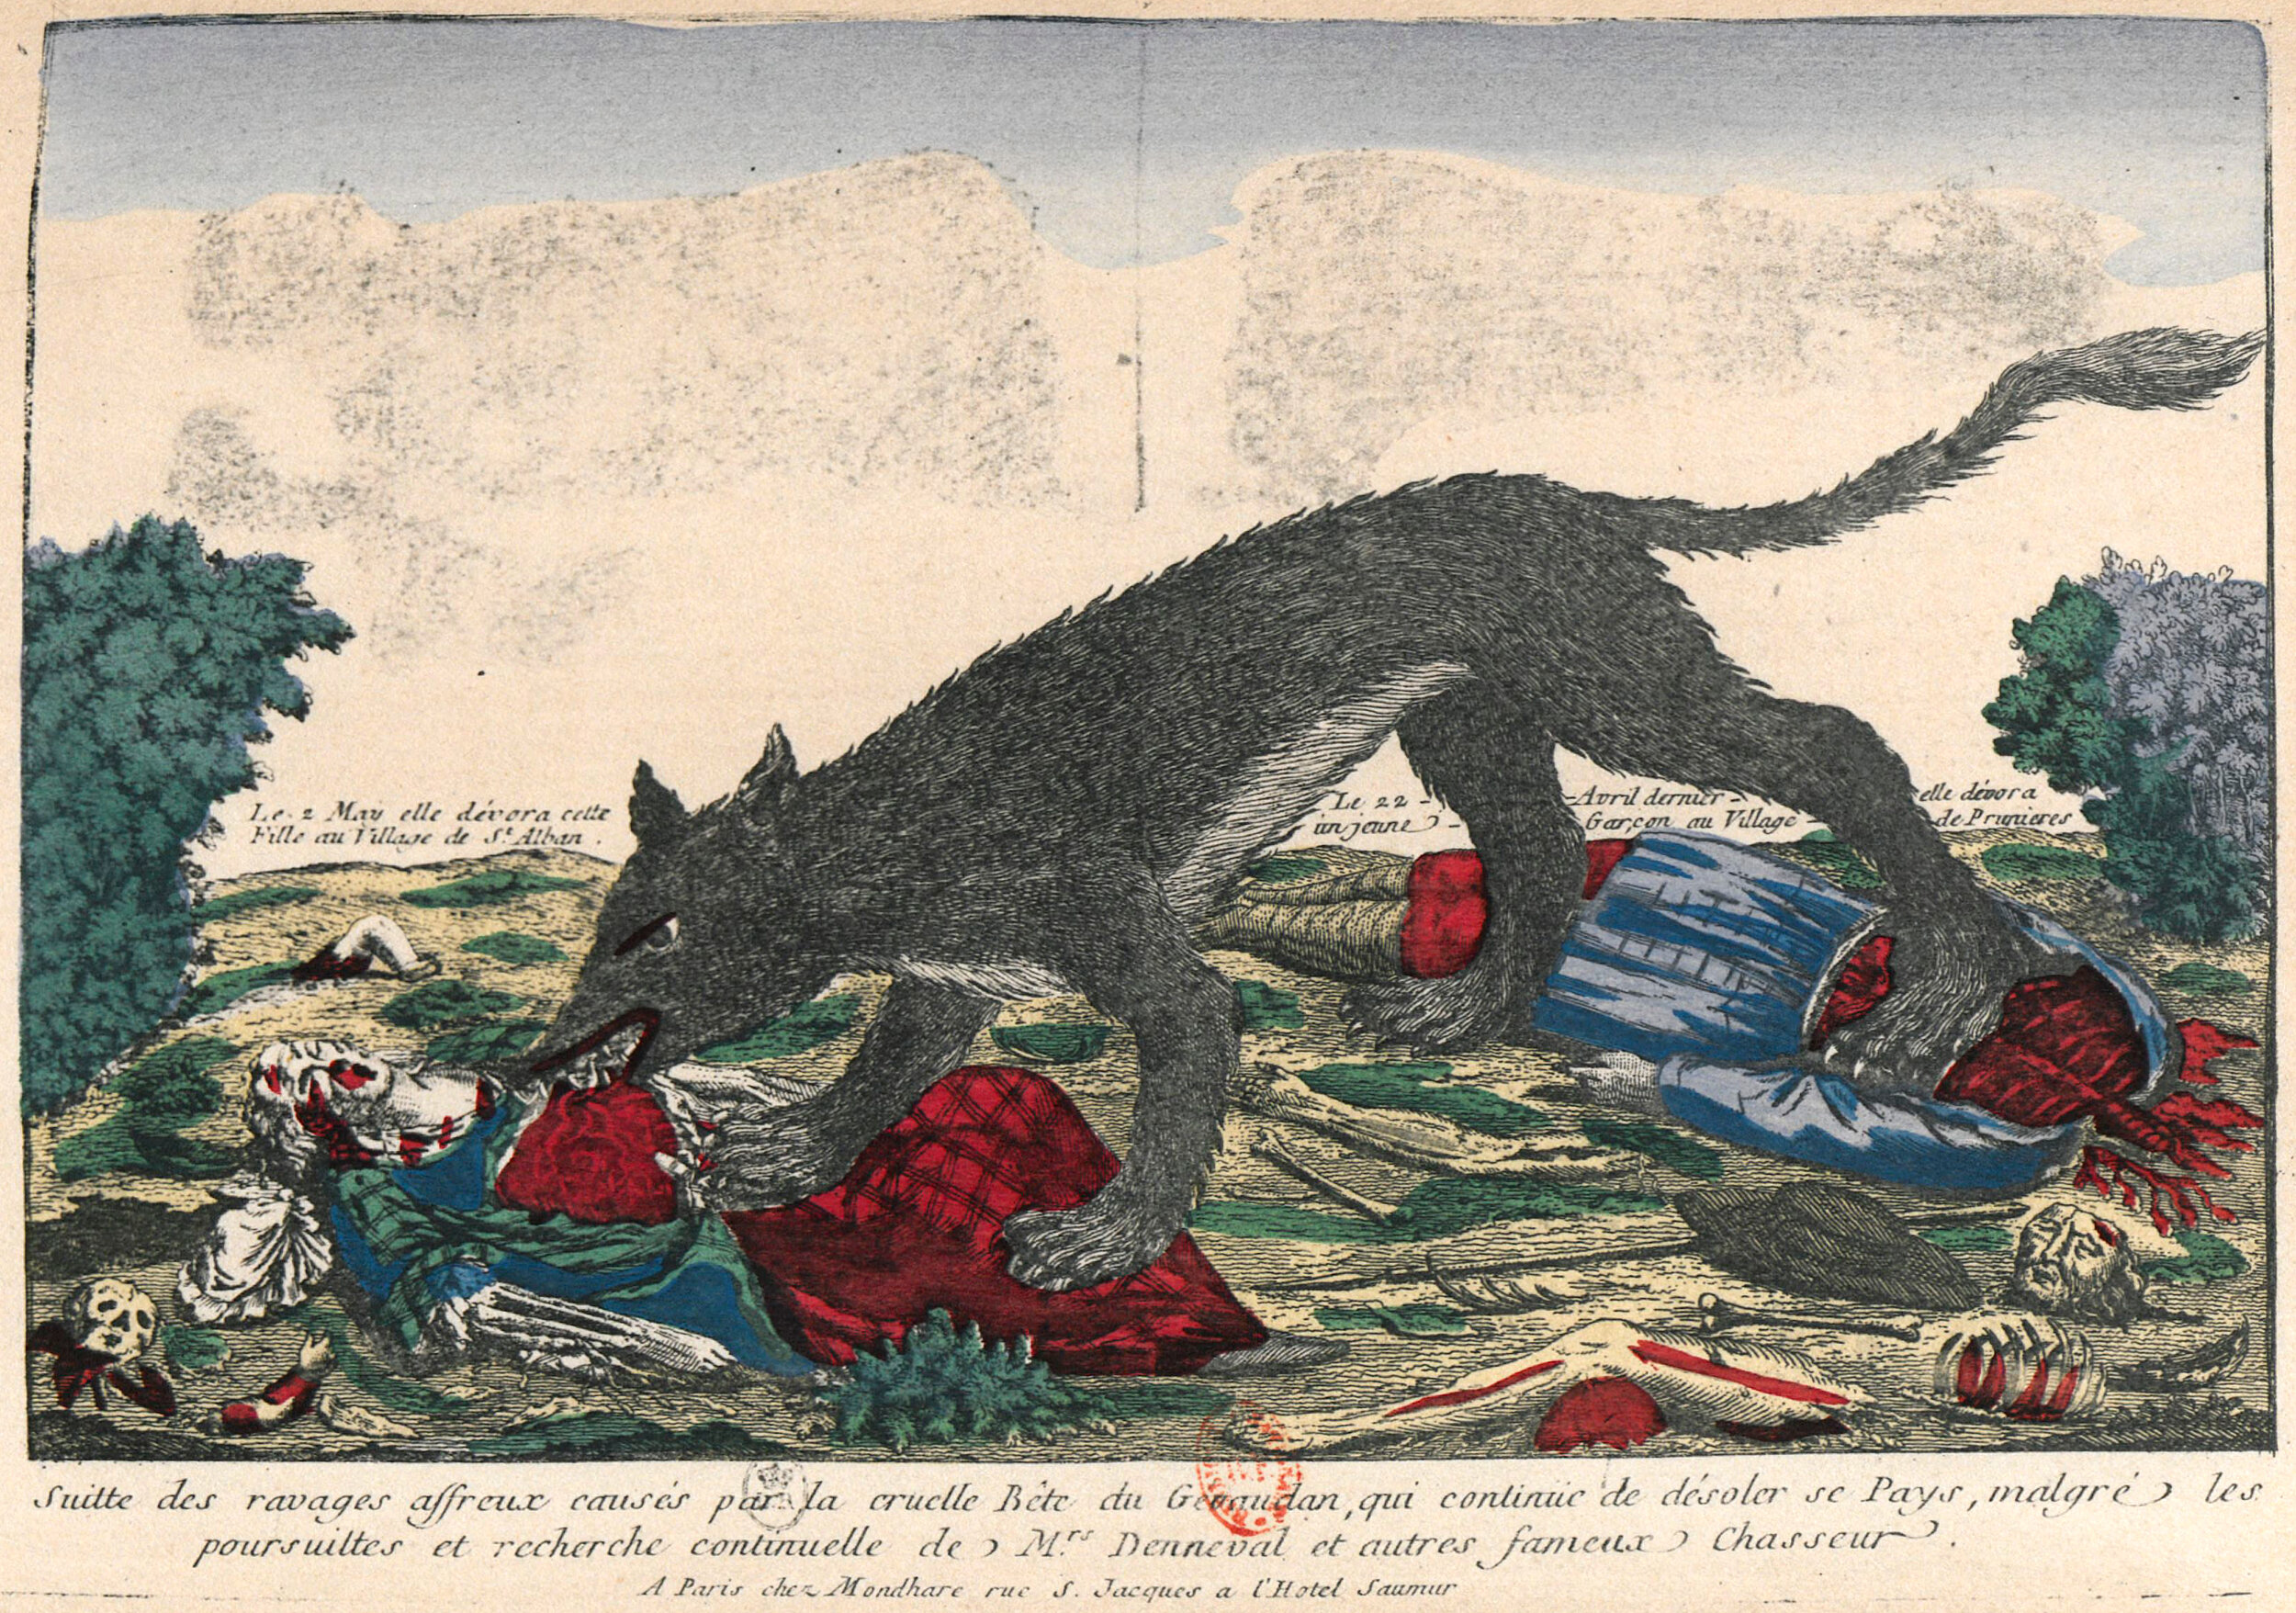  18th c. print depicting the Beast, from the  Gallica Digital Library  